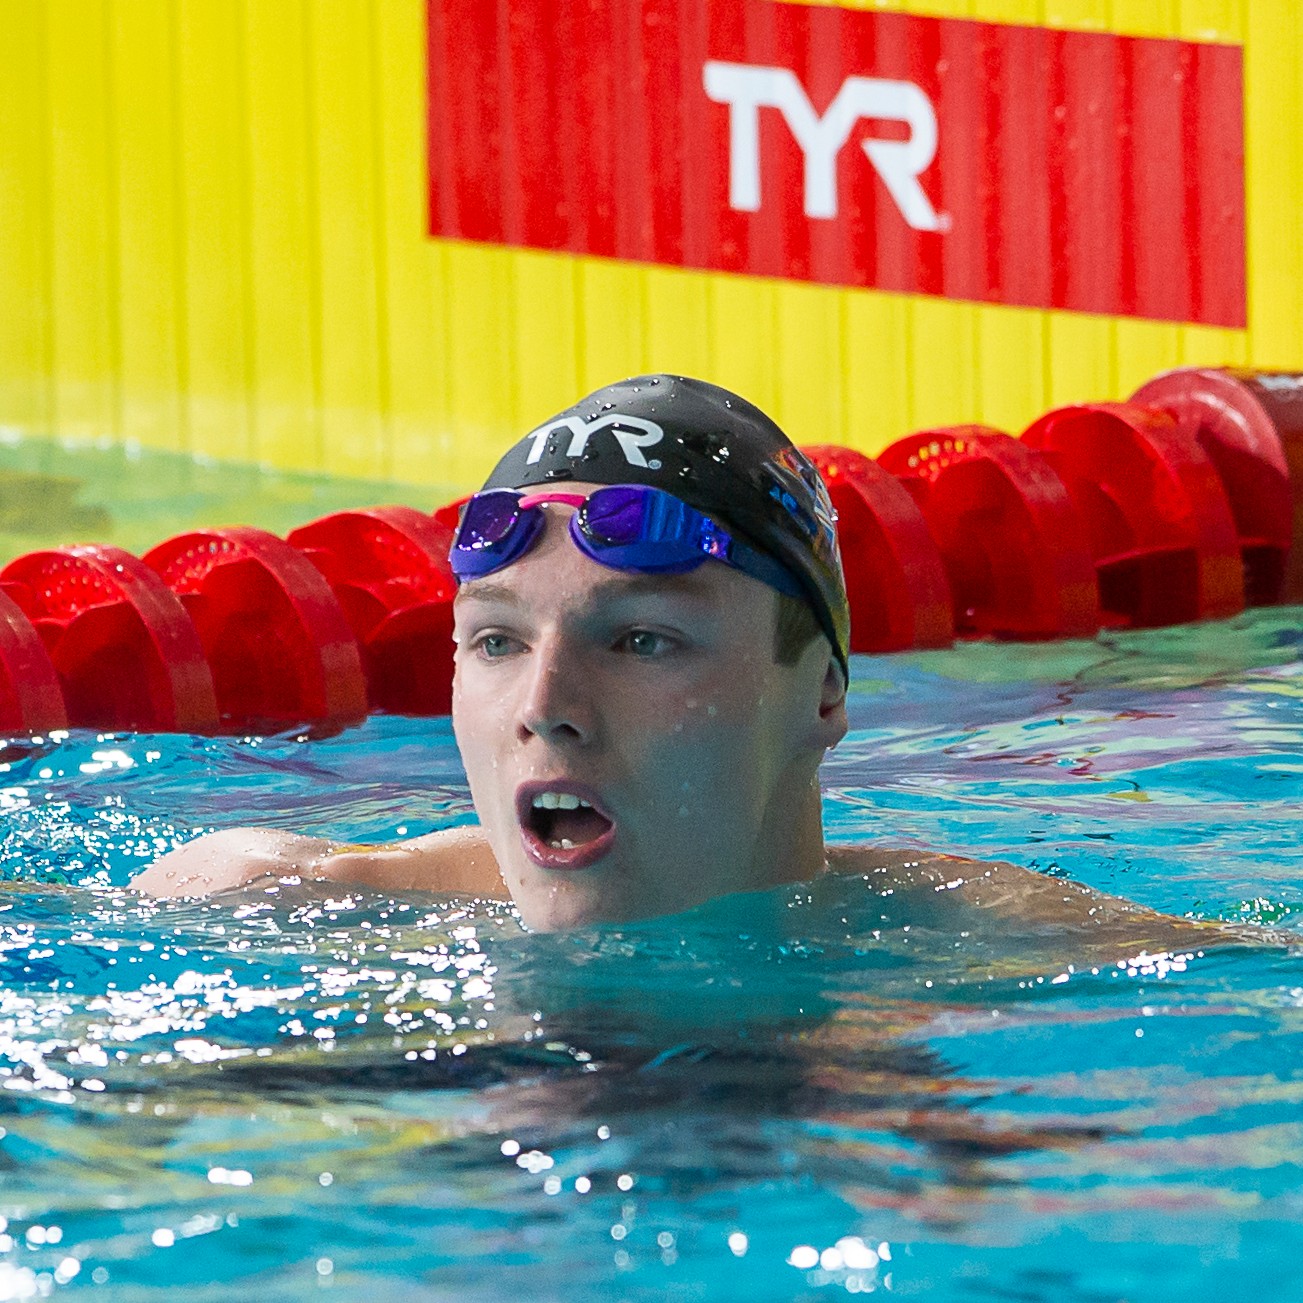 Scott swam the second fastest split of all time in the 4x100m medley final